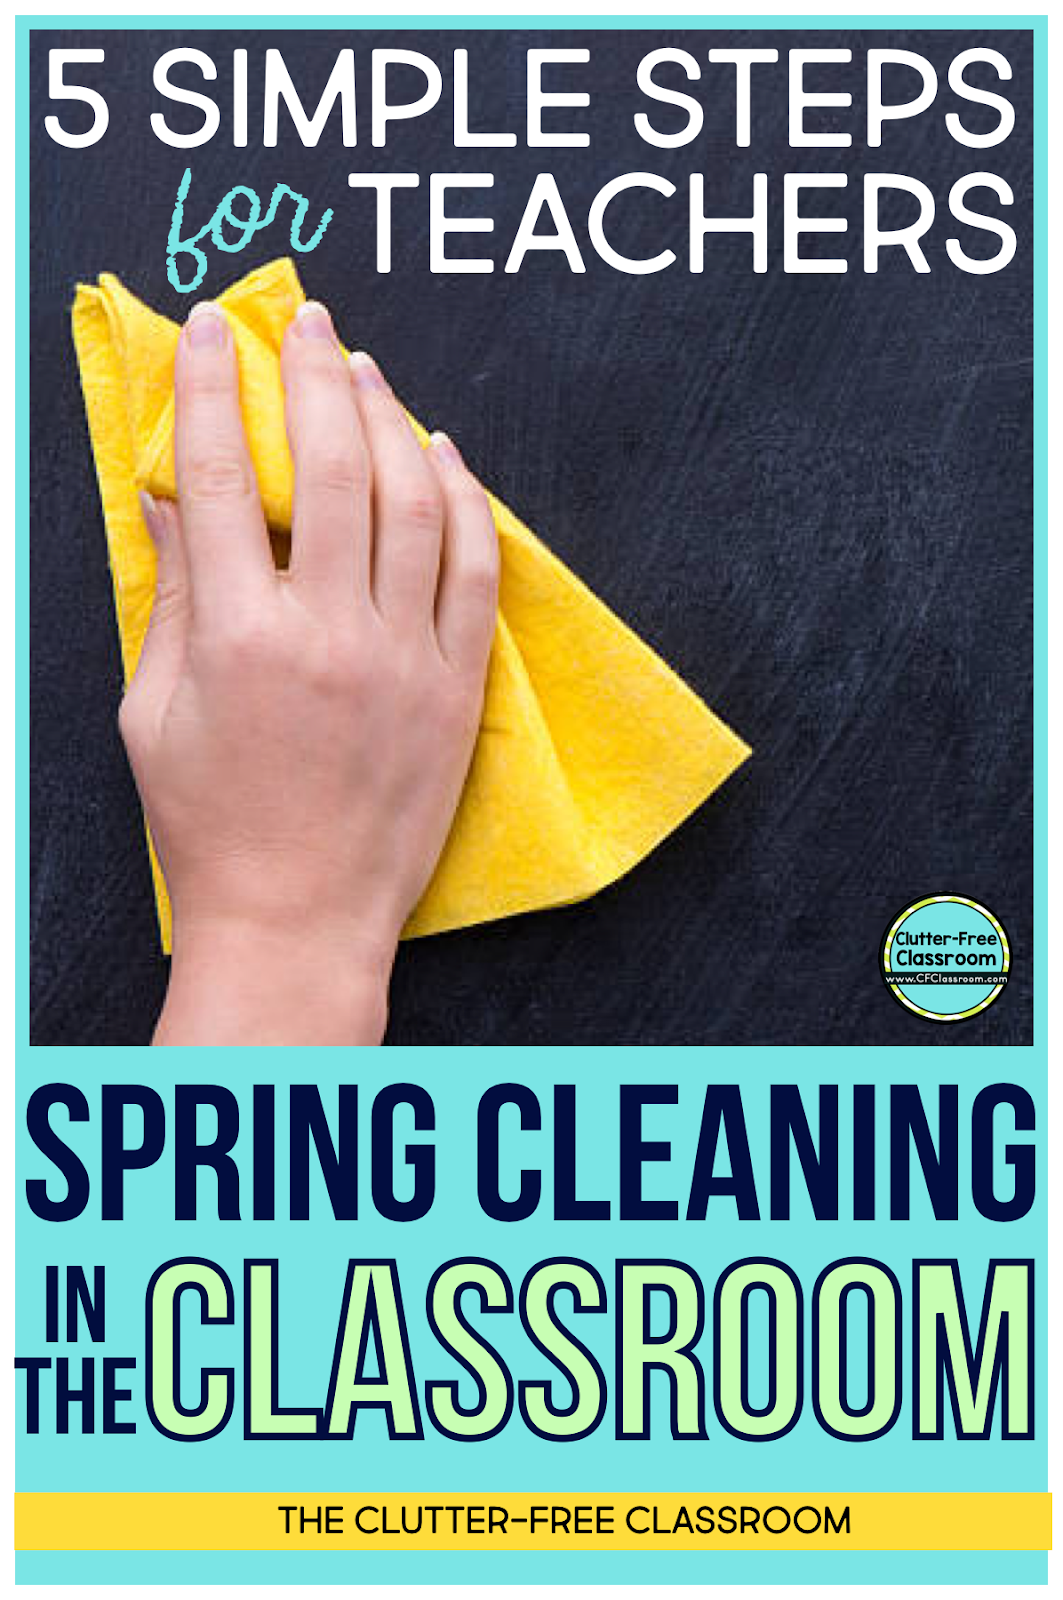 Now is the time to get your classroom clean and organized. These 5 easy steps are perfect for spring cleaning, packing at the end of the school year or anytime you want to improve your classroom organization! 